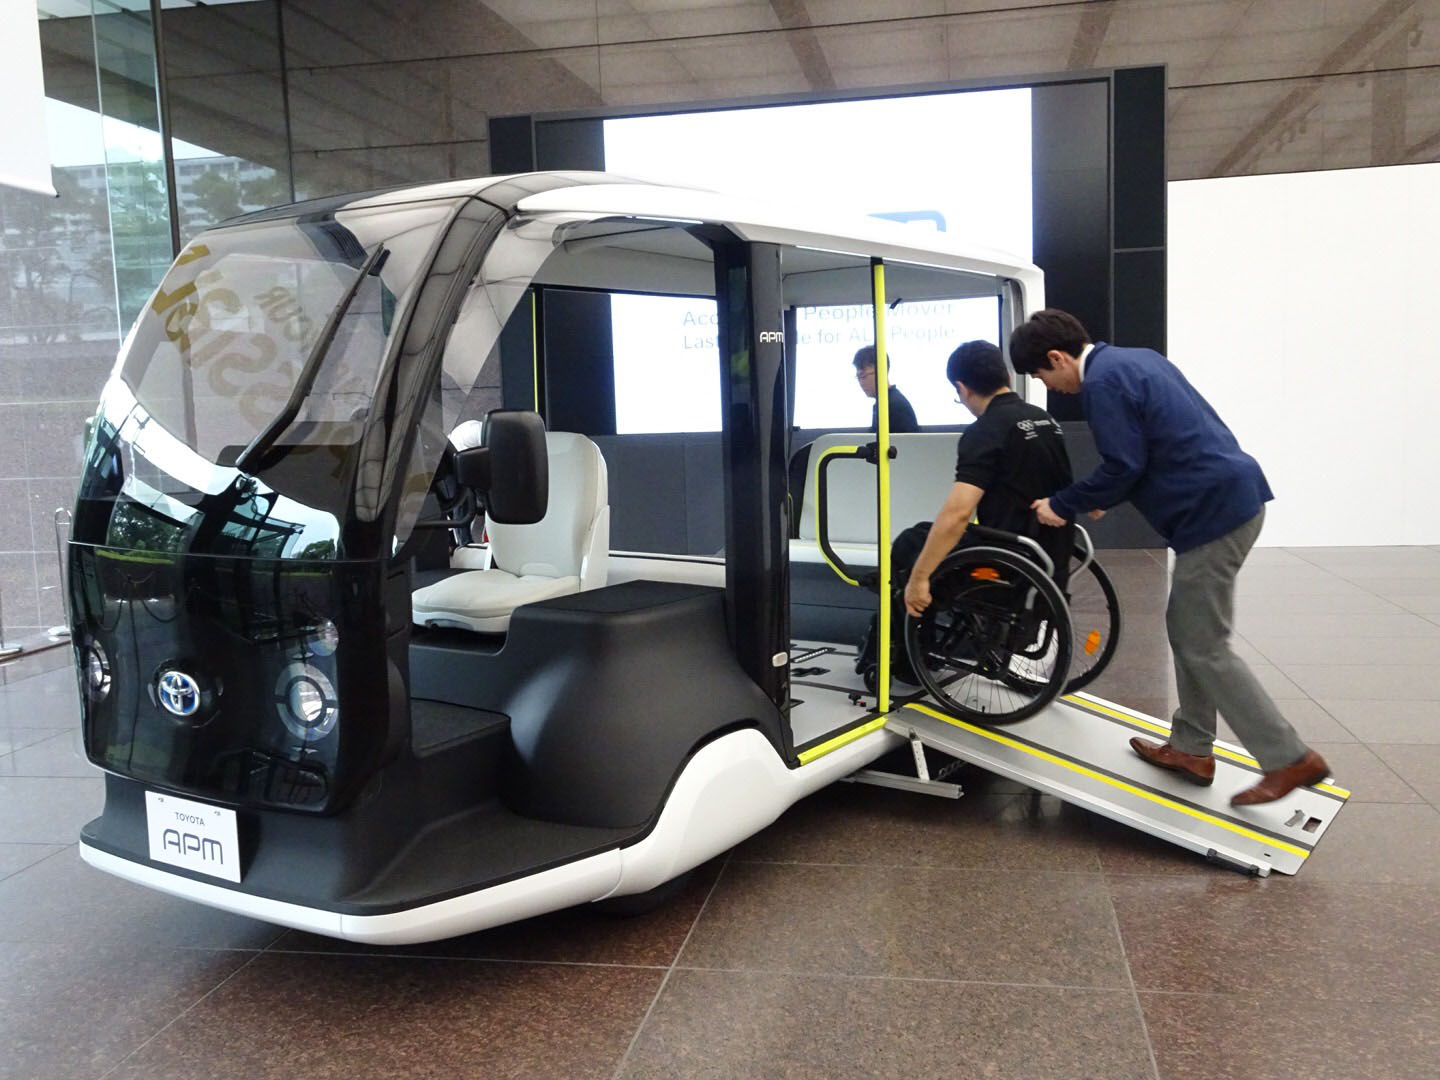 Toyota Motor Corp. shows off an electric vehicle designed to transport people around venues for the 2020 Olympics, at its headquarters in Tokyo on Thursday. | KAZUAKI NAGATA